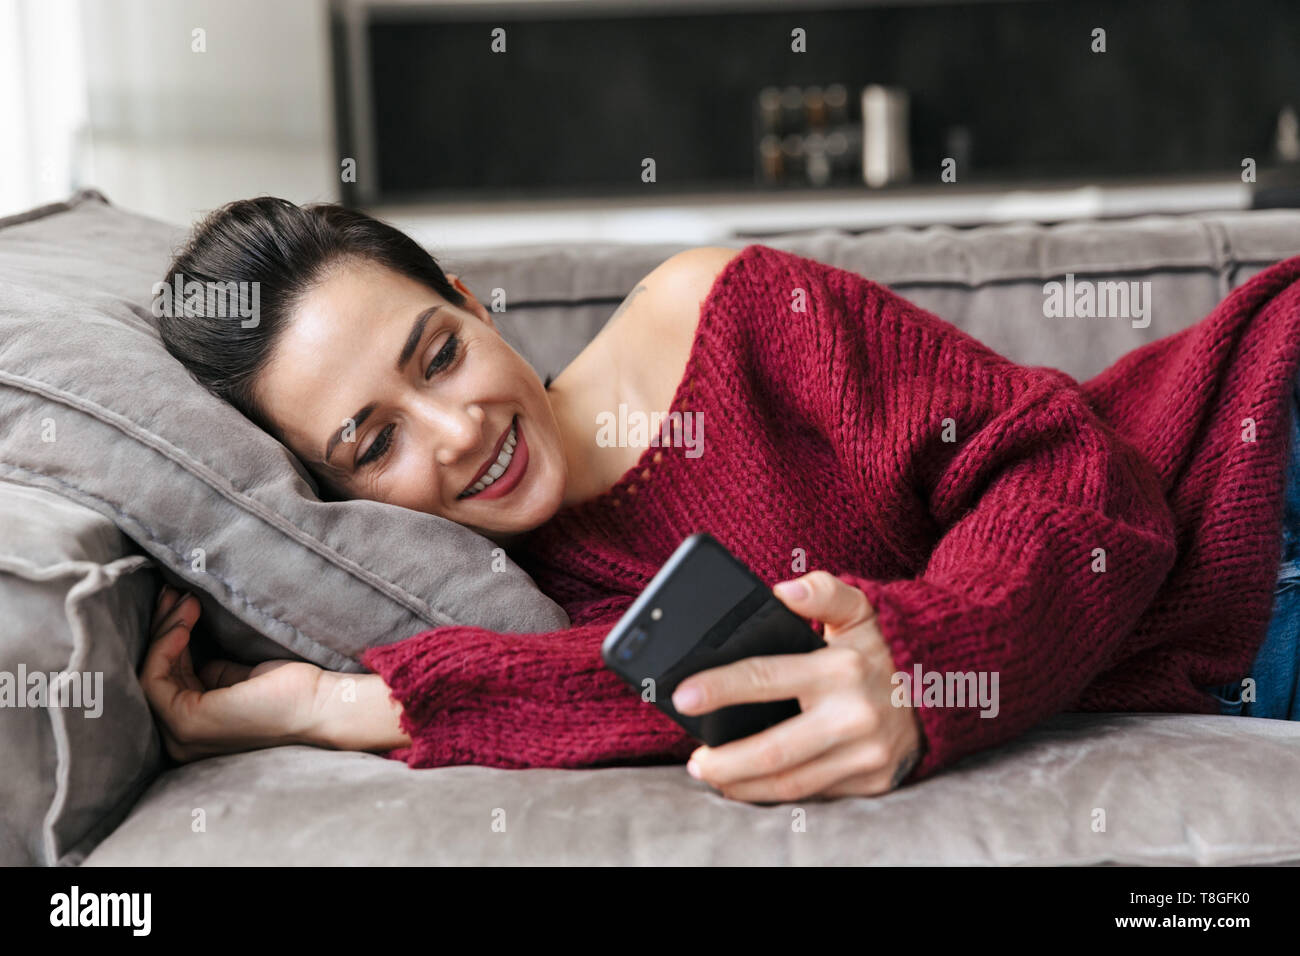 Image of a beautiful woman indoors in home on sofa using mobile phone. Stock Photo